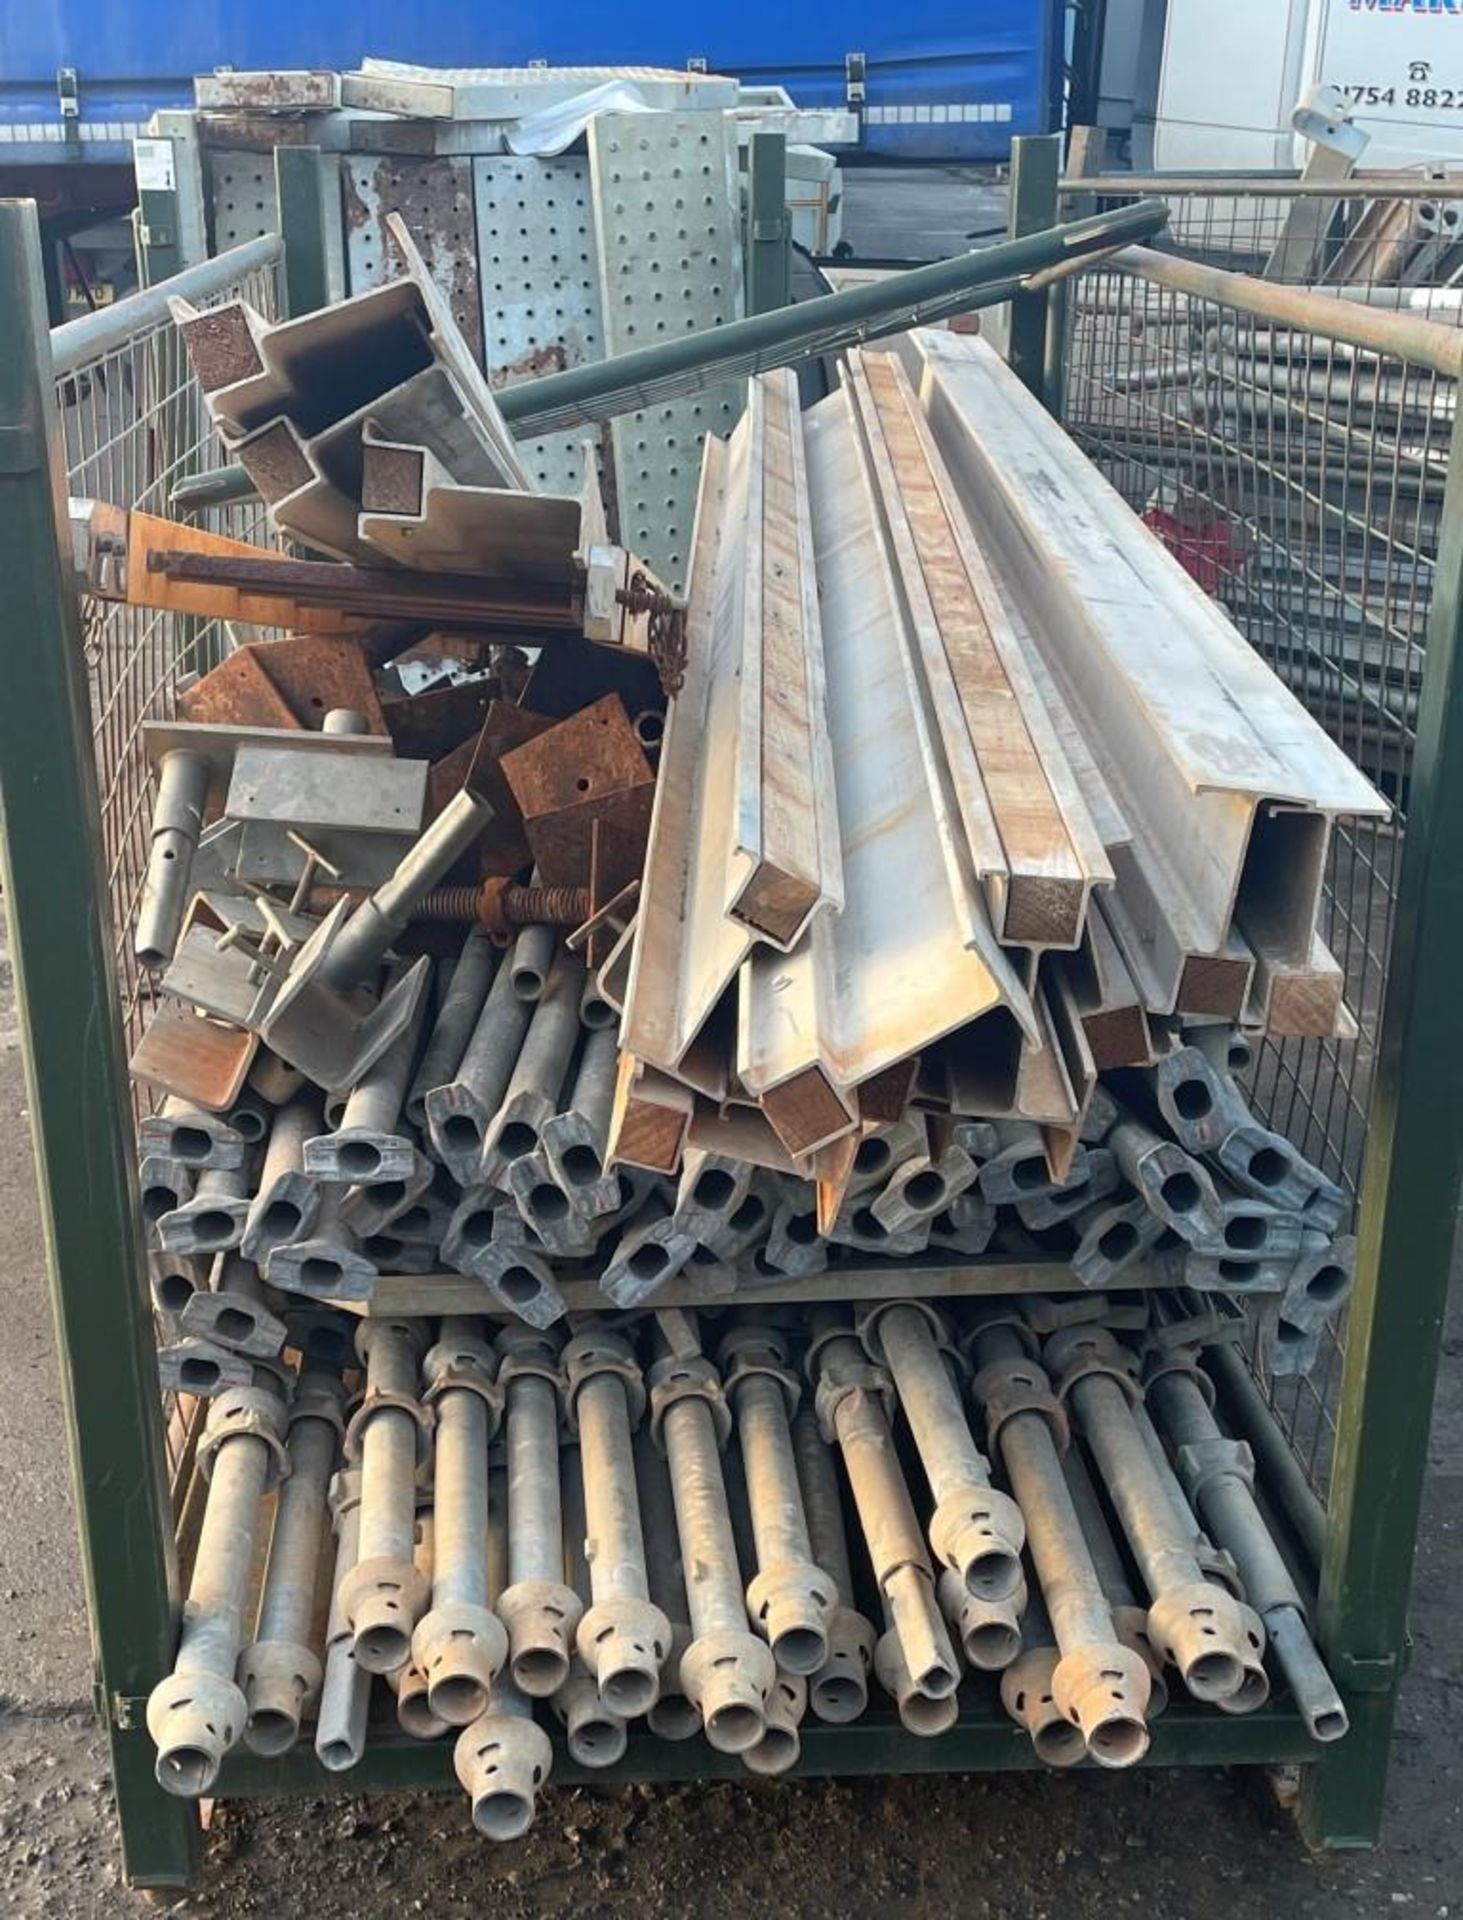 Various Cuplok scaffolding components - poles, planks, connectors - see pictures for more details - Image 16 of 38